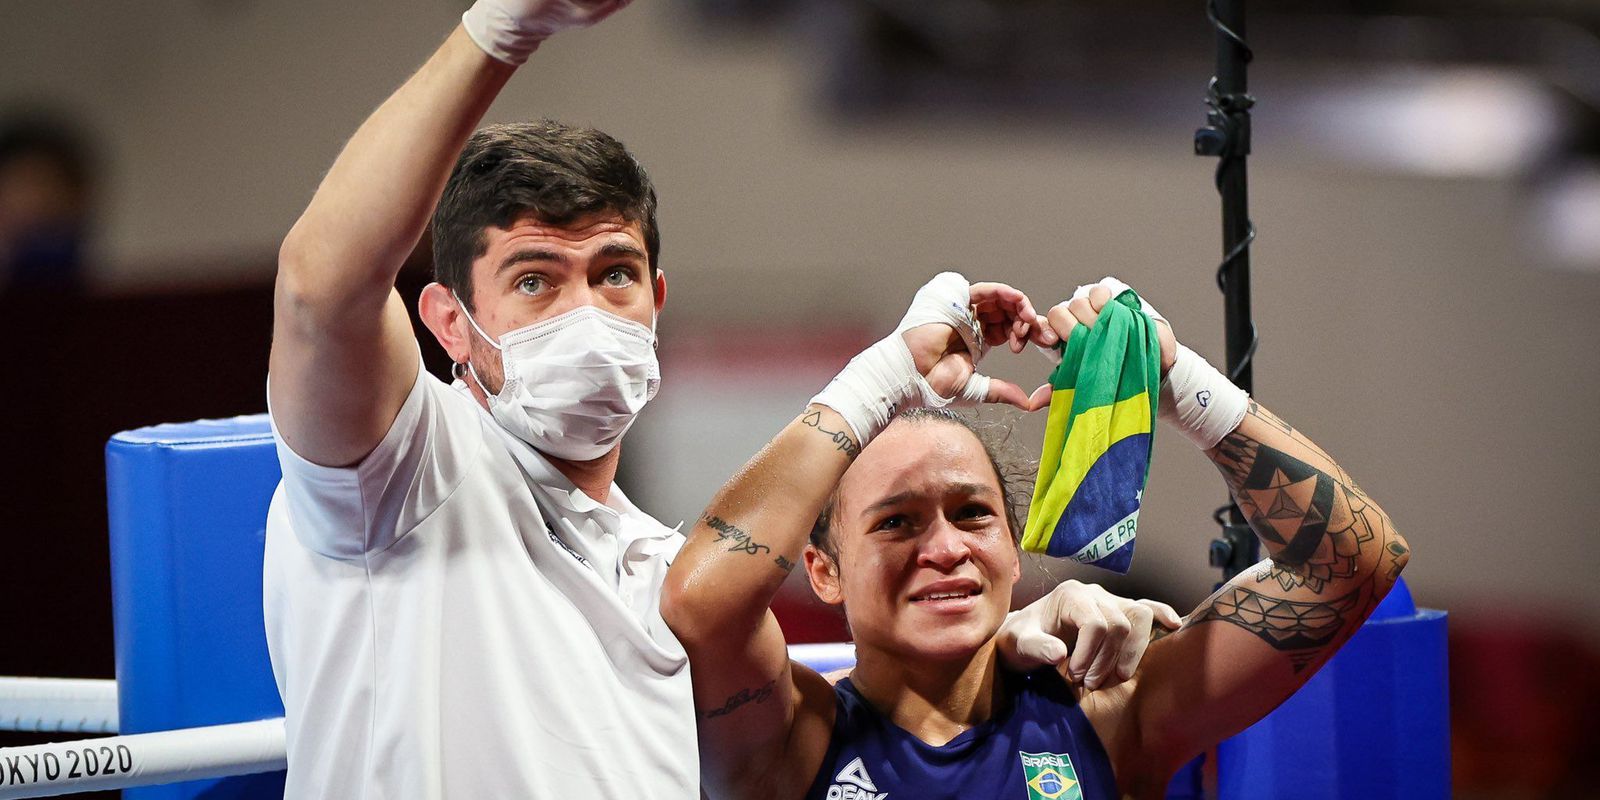 Bia Ferreira wins again and advances to the quarterfinals of the Boxing World Cup